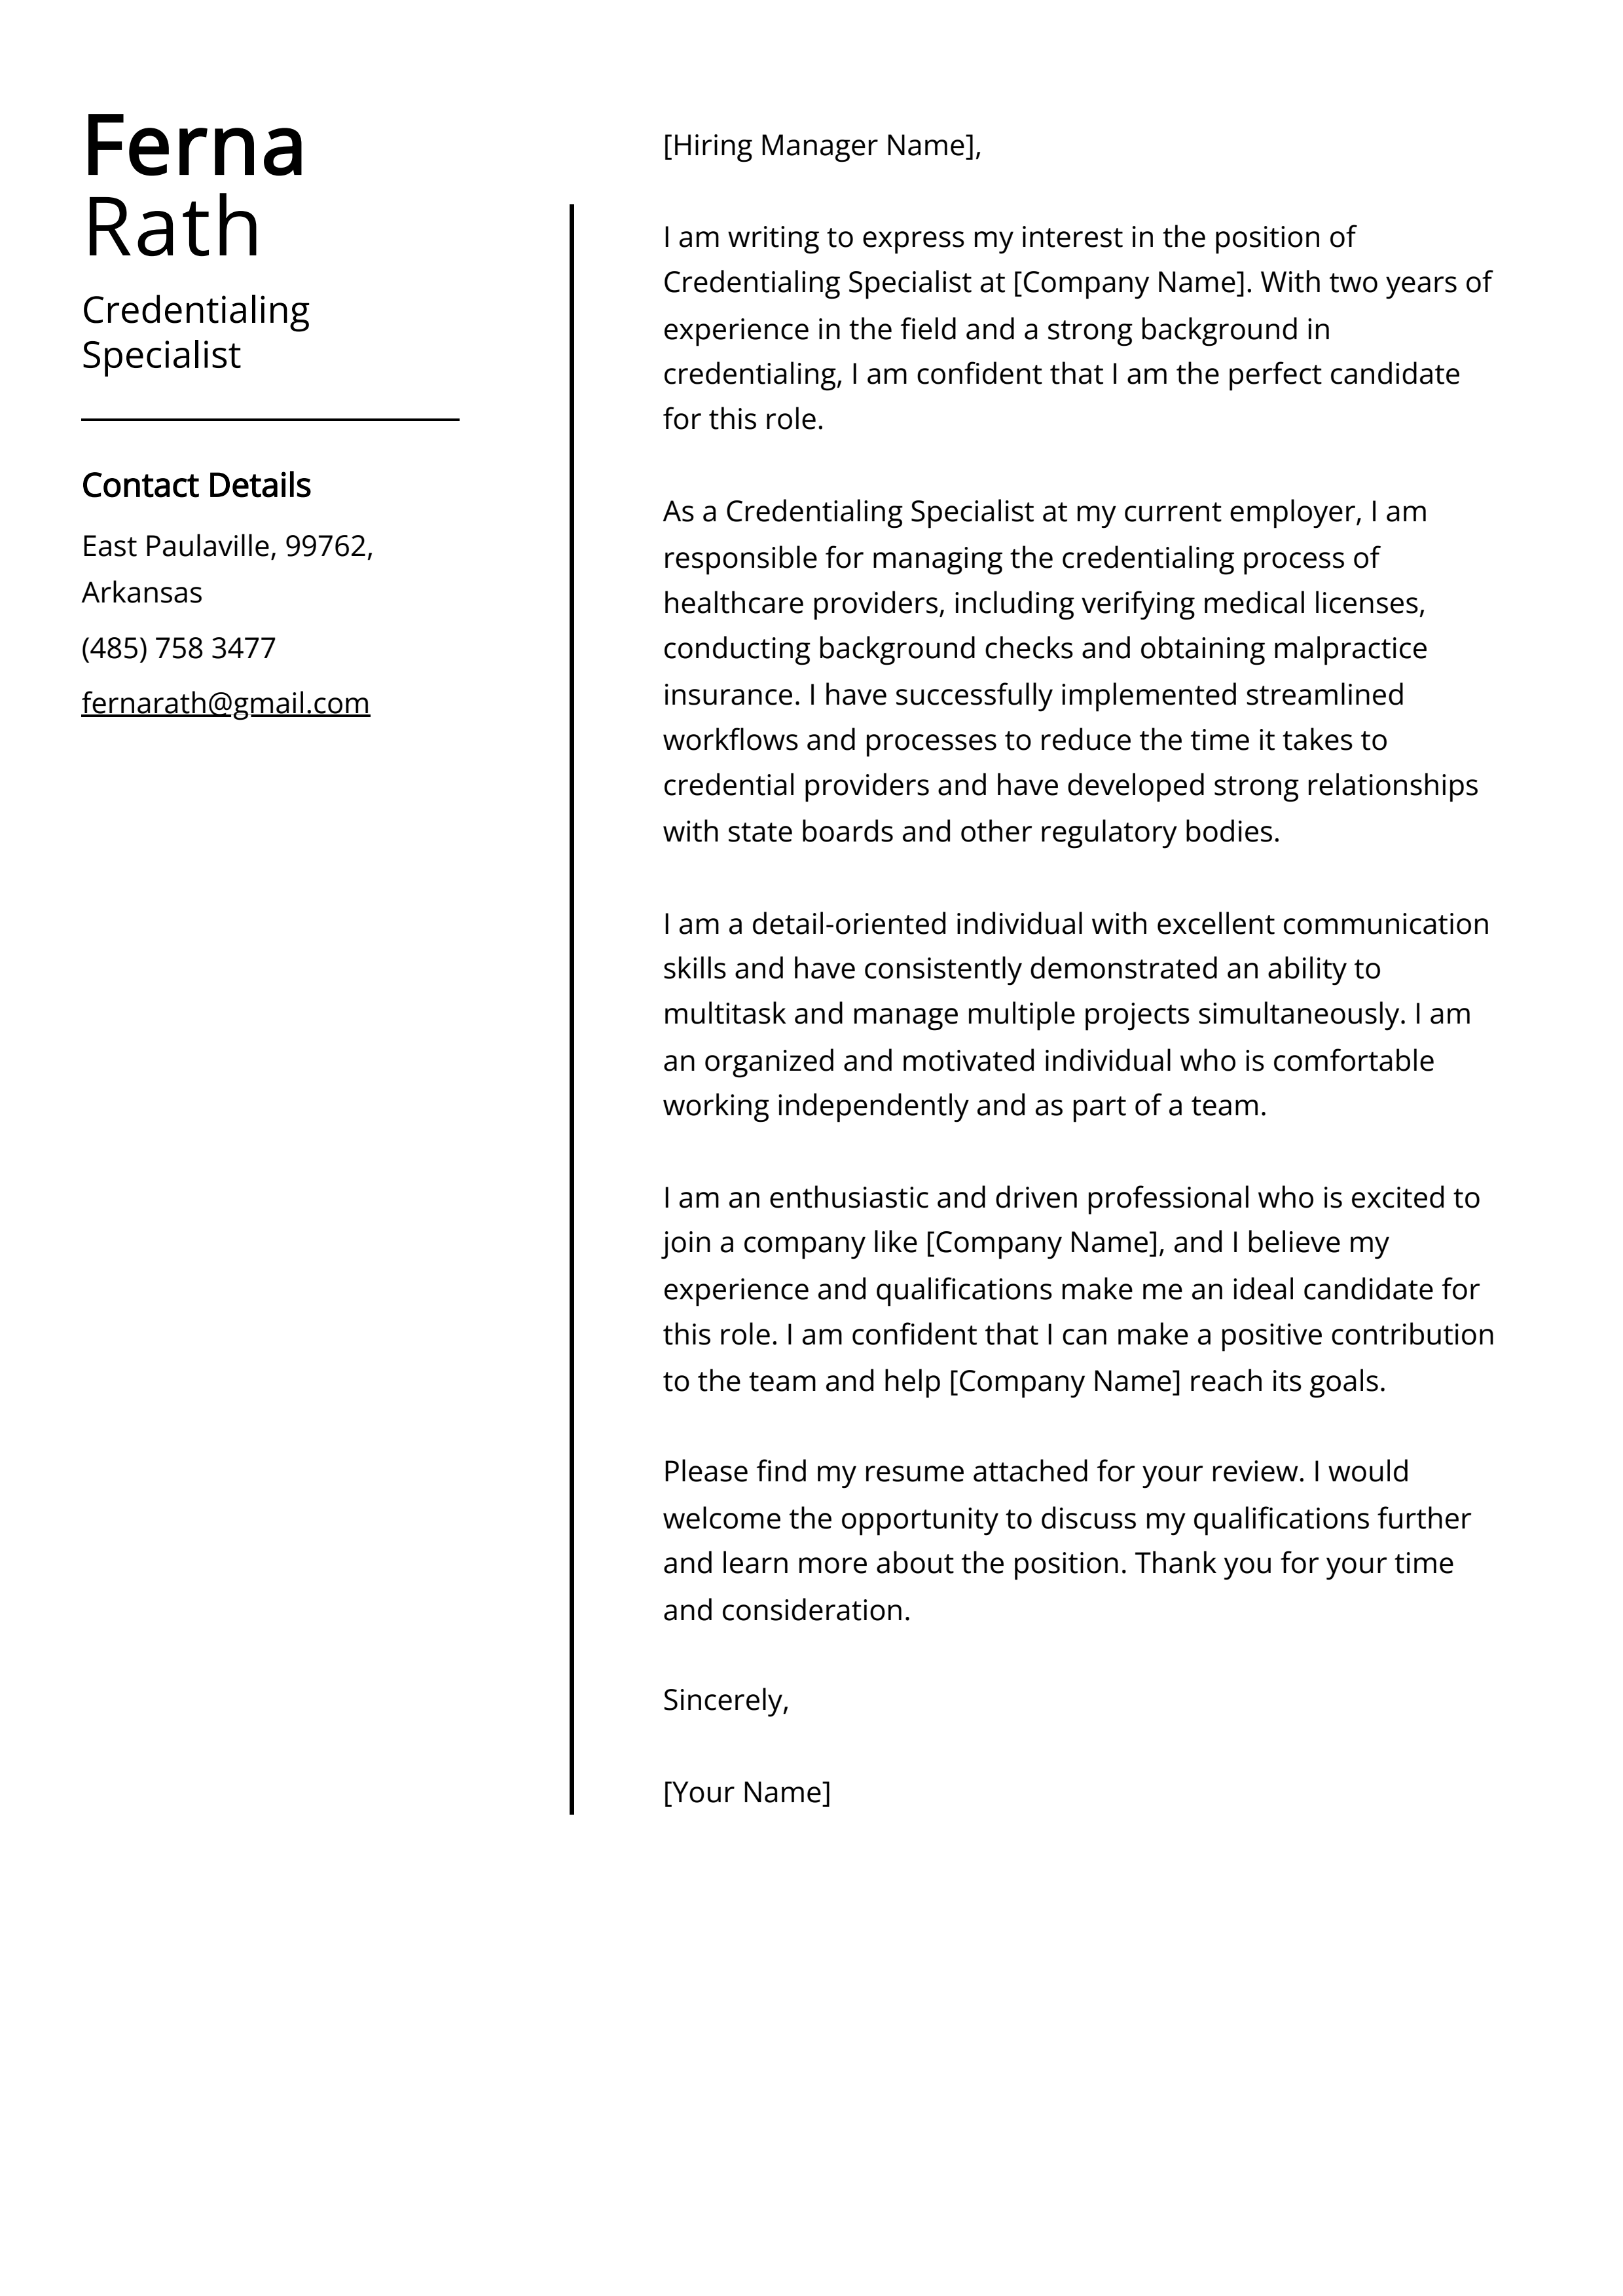 Credentialing Specialist Cover Letter Example